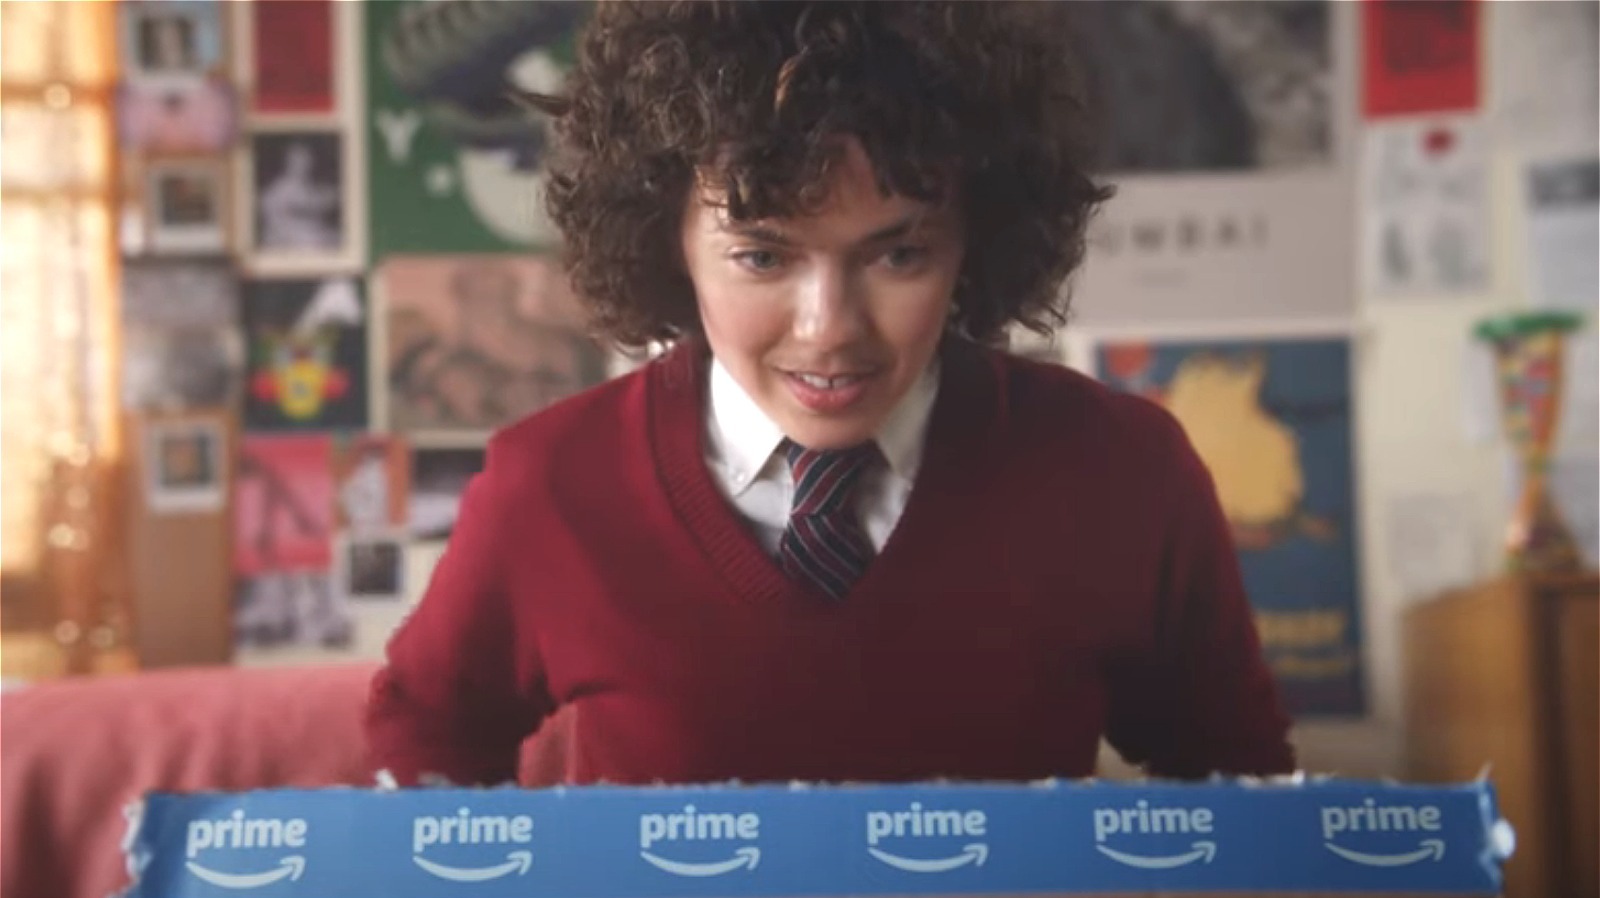 What Is The Song In Amazon's Mustache Commercial Directed By Olivia Wilde?